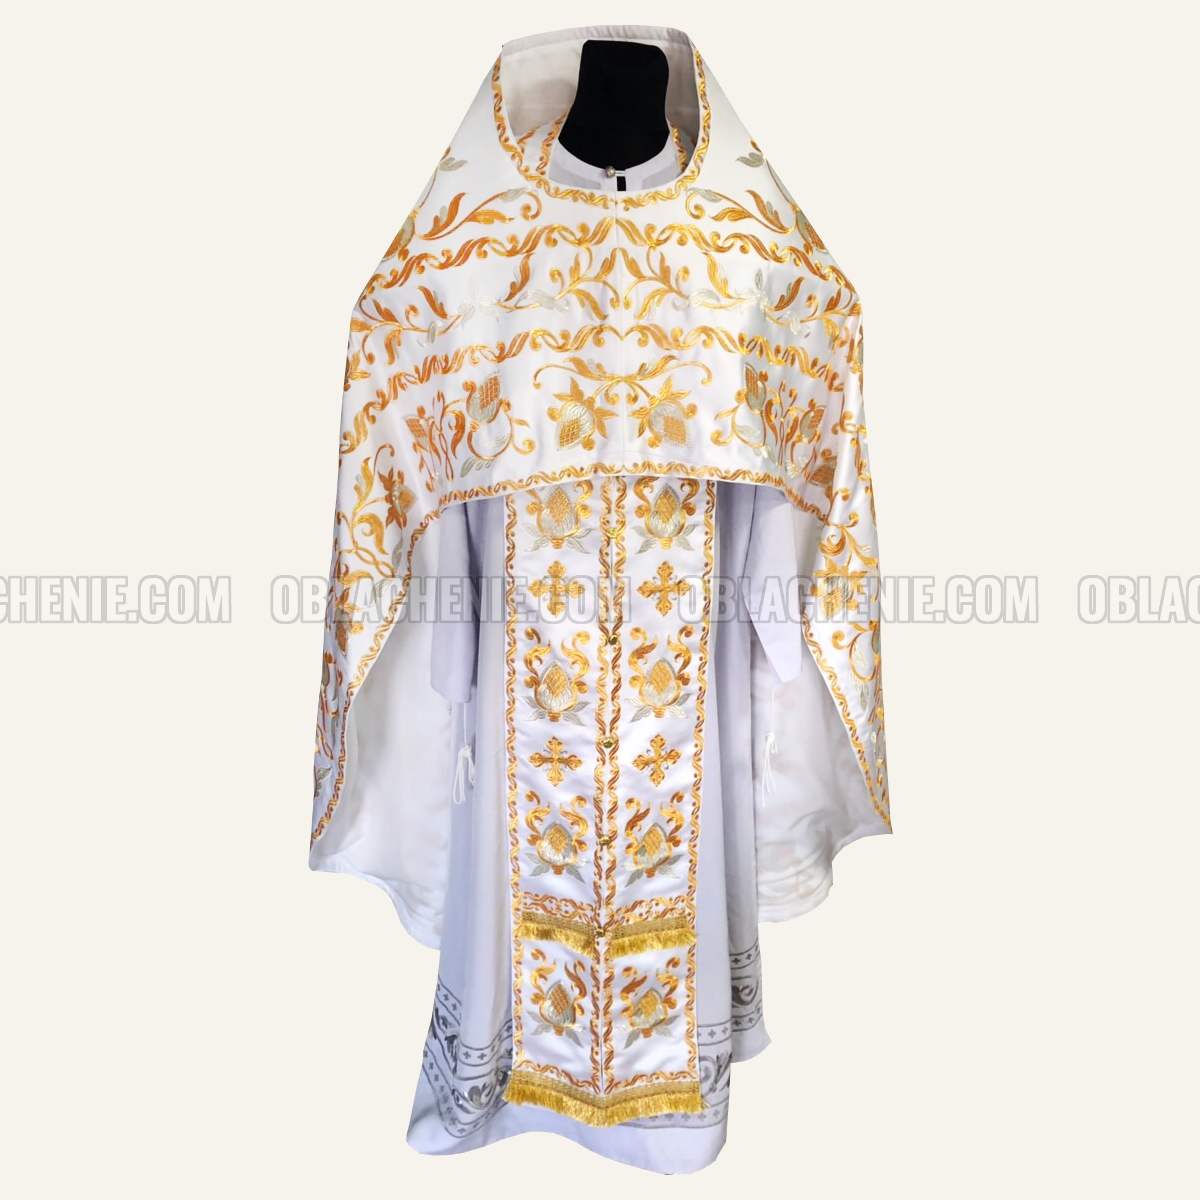 Embroidered priest's vestments 10211